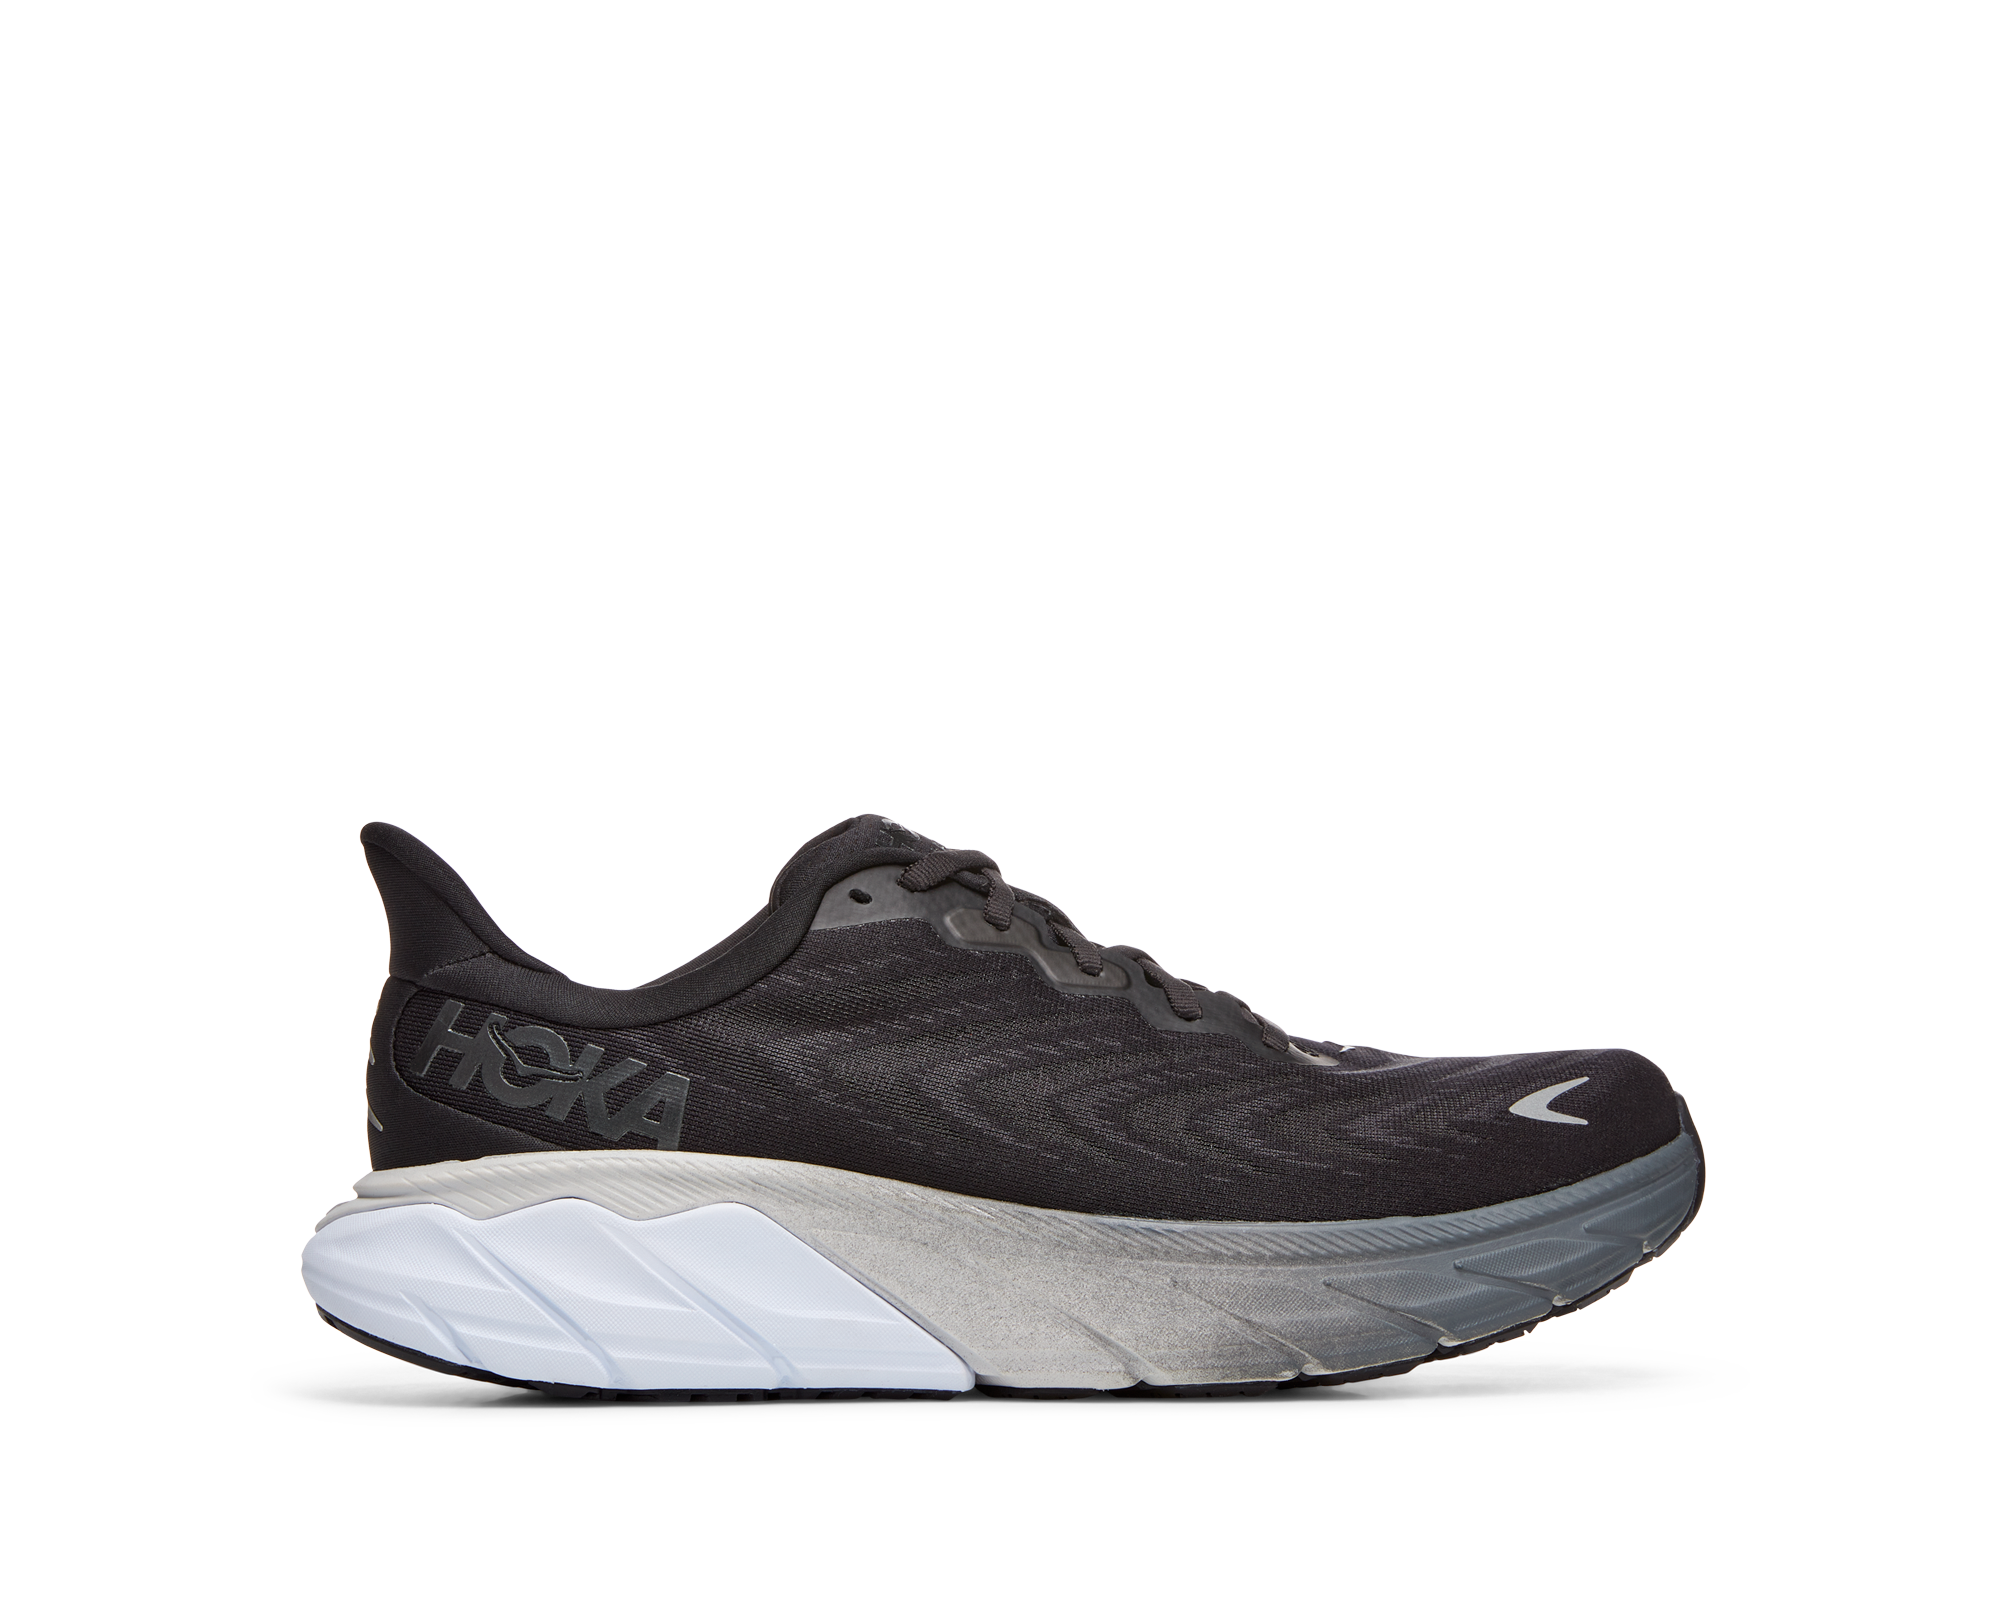 Lateral view of the Men's Arahi 6 by HOKA in the wide 2E width, color Black/White